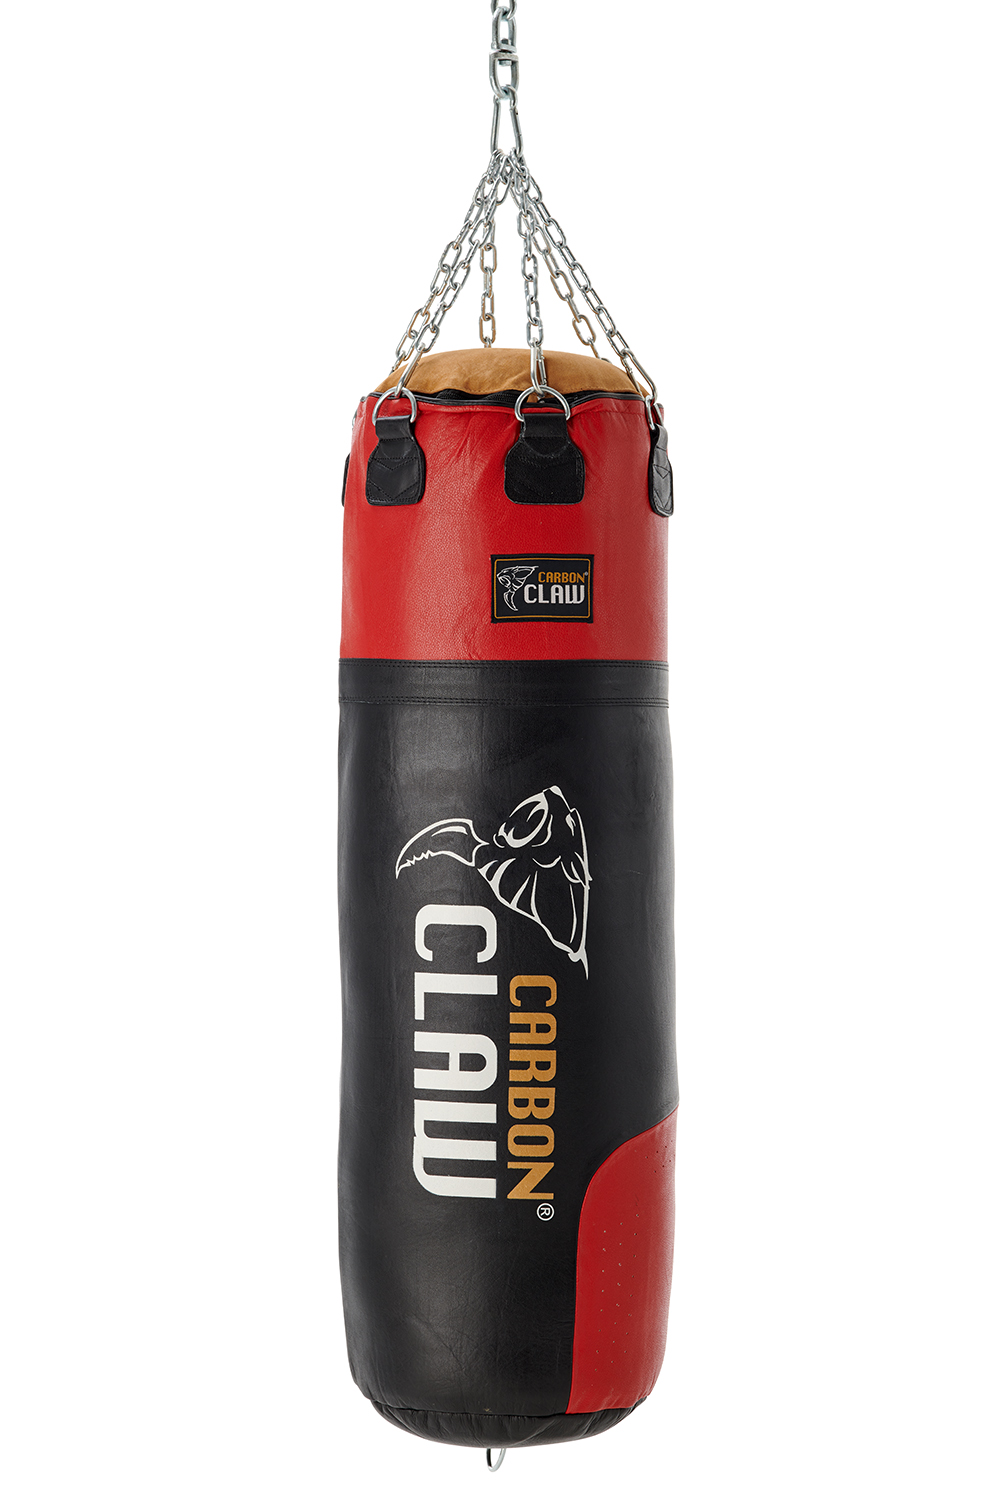 G4 5ft Cowhide Leather Punch Bag Punching Kick Boxing Gloves Punchbag Heavy Bags 